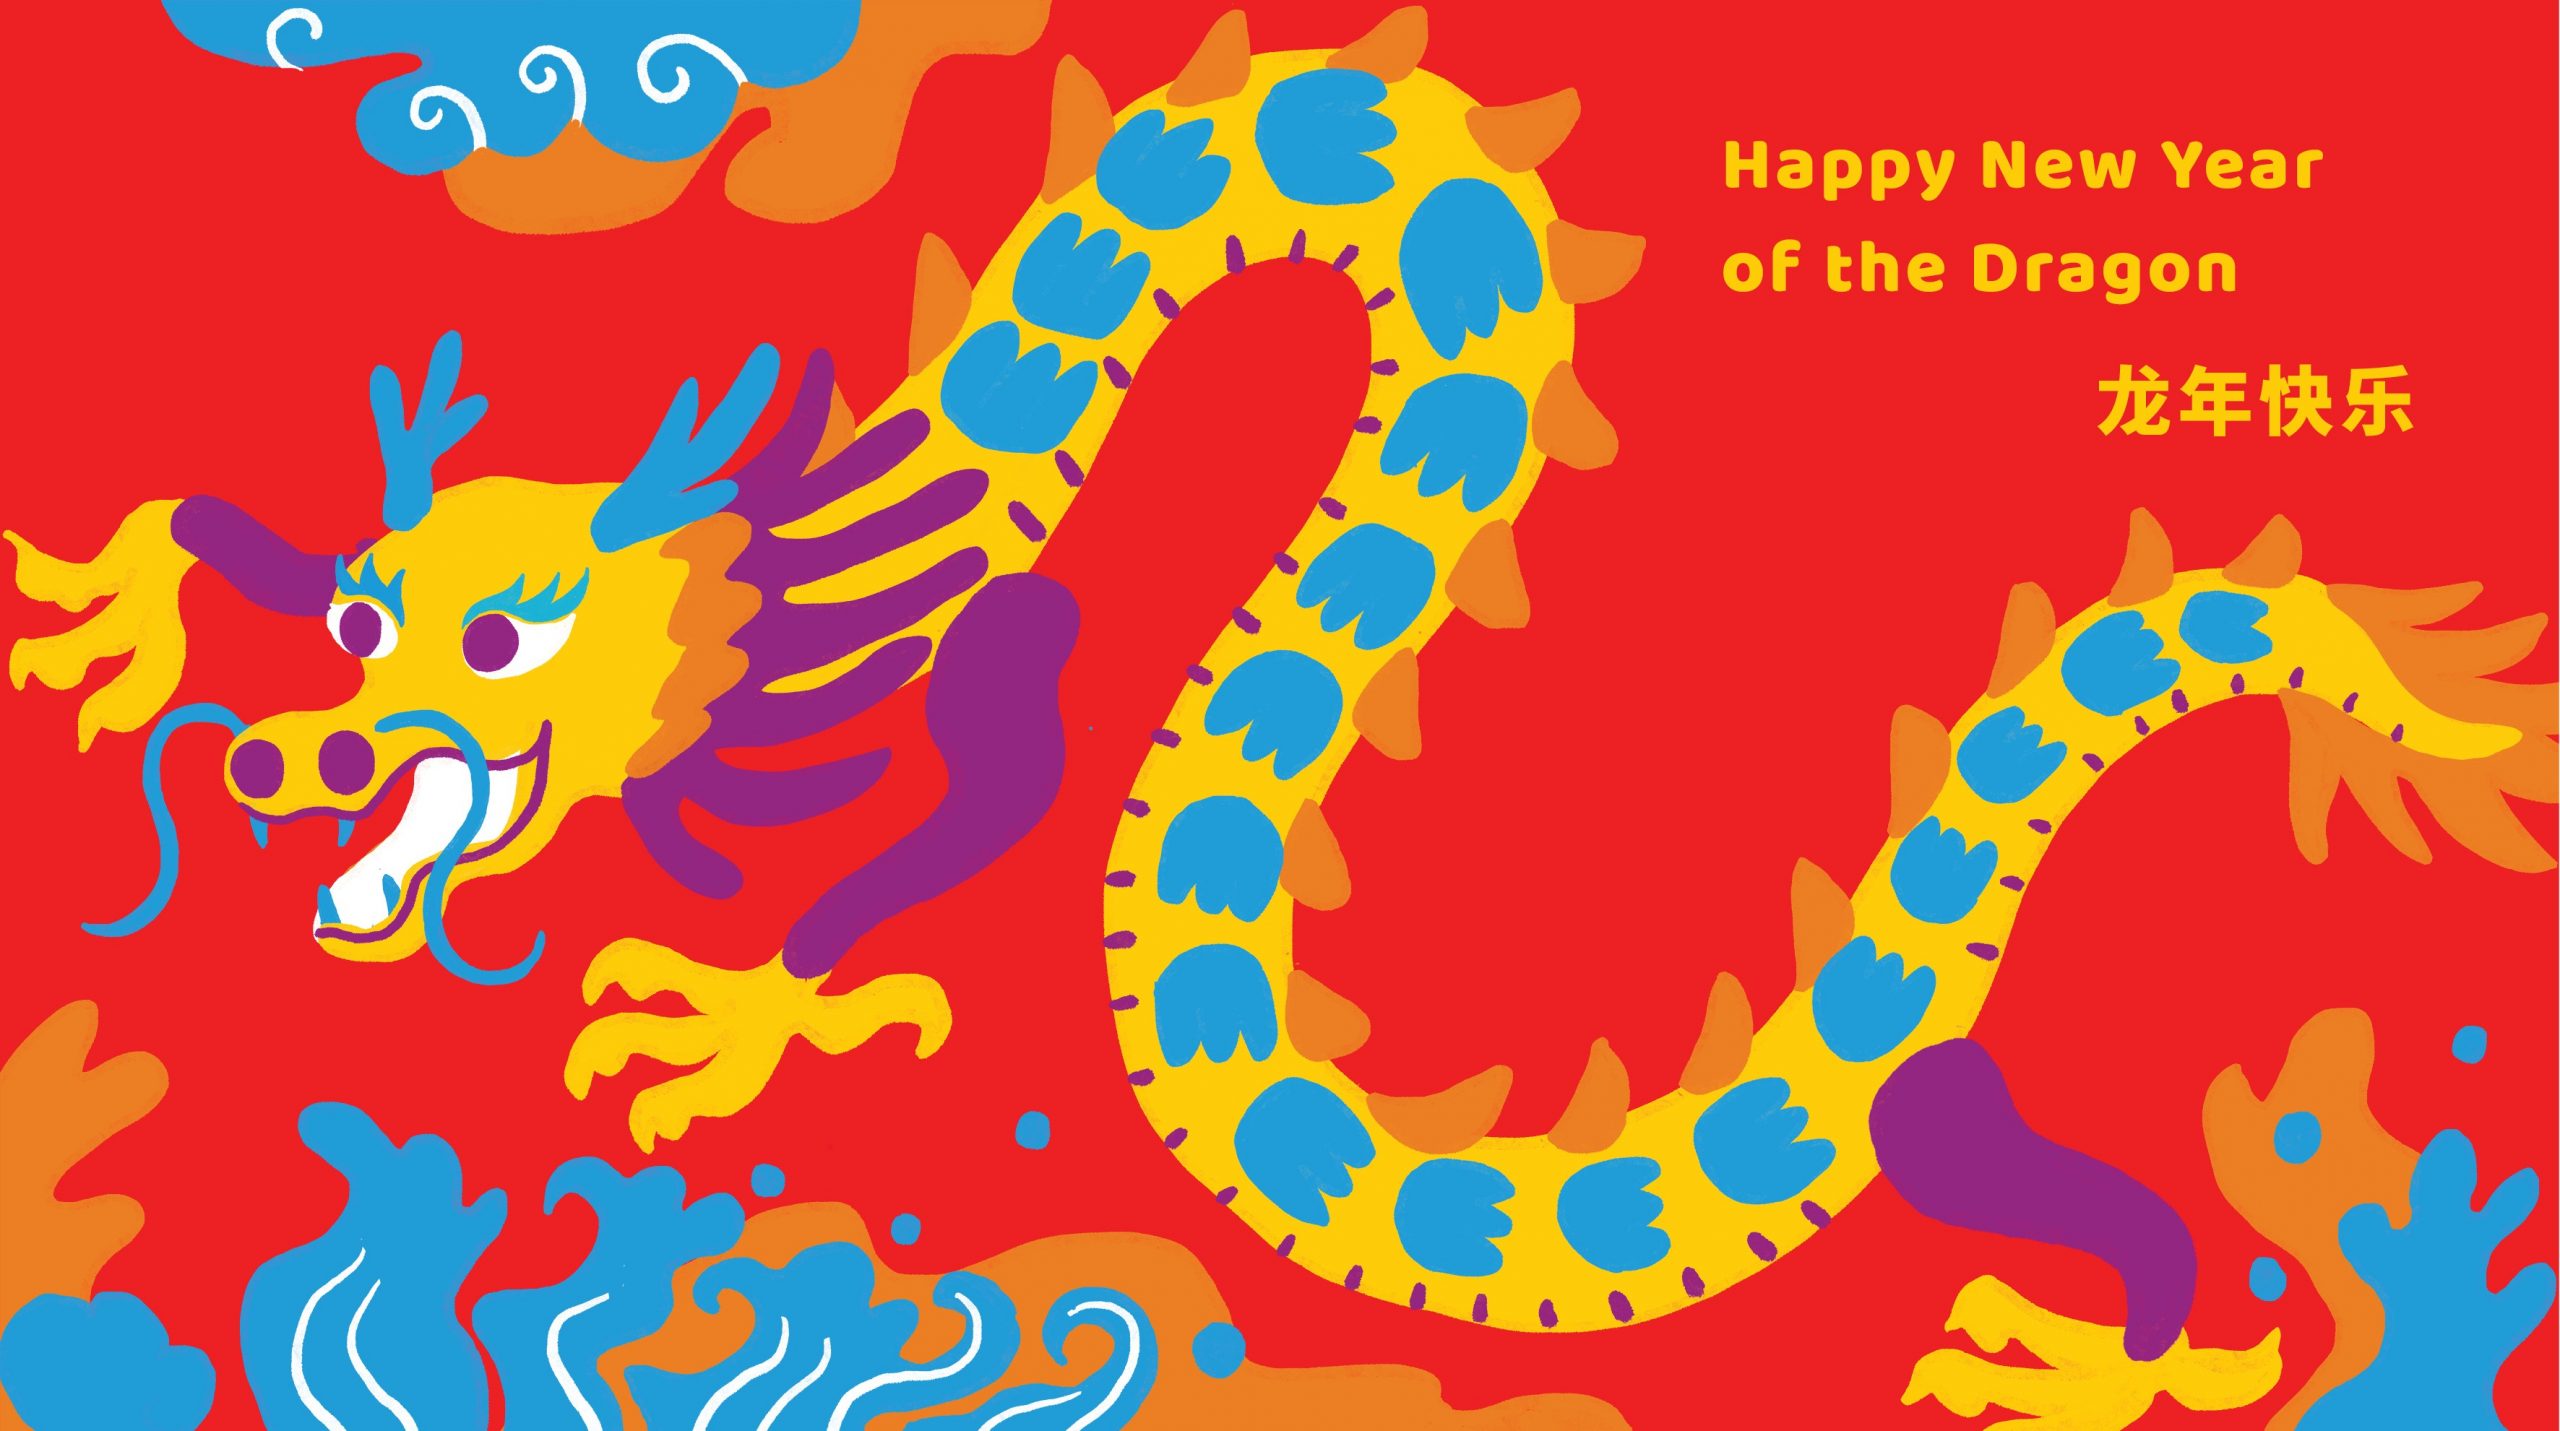 Global Neighbours wishes You a Happy New Year of the Dragon!